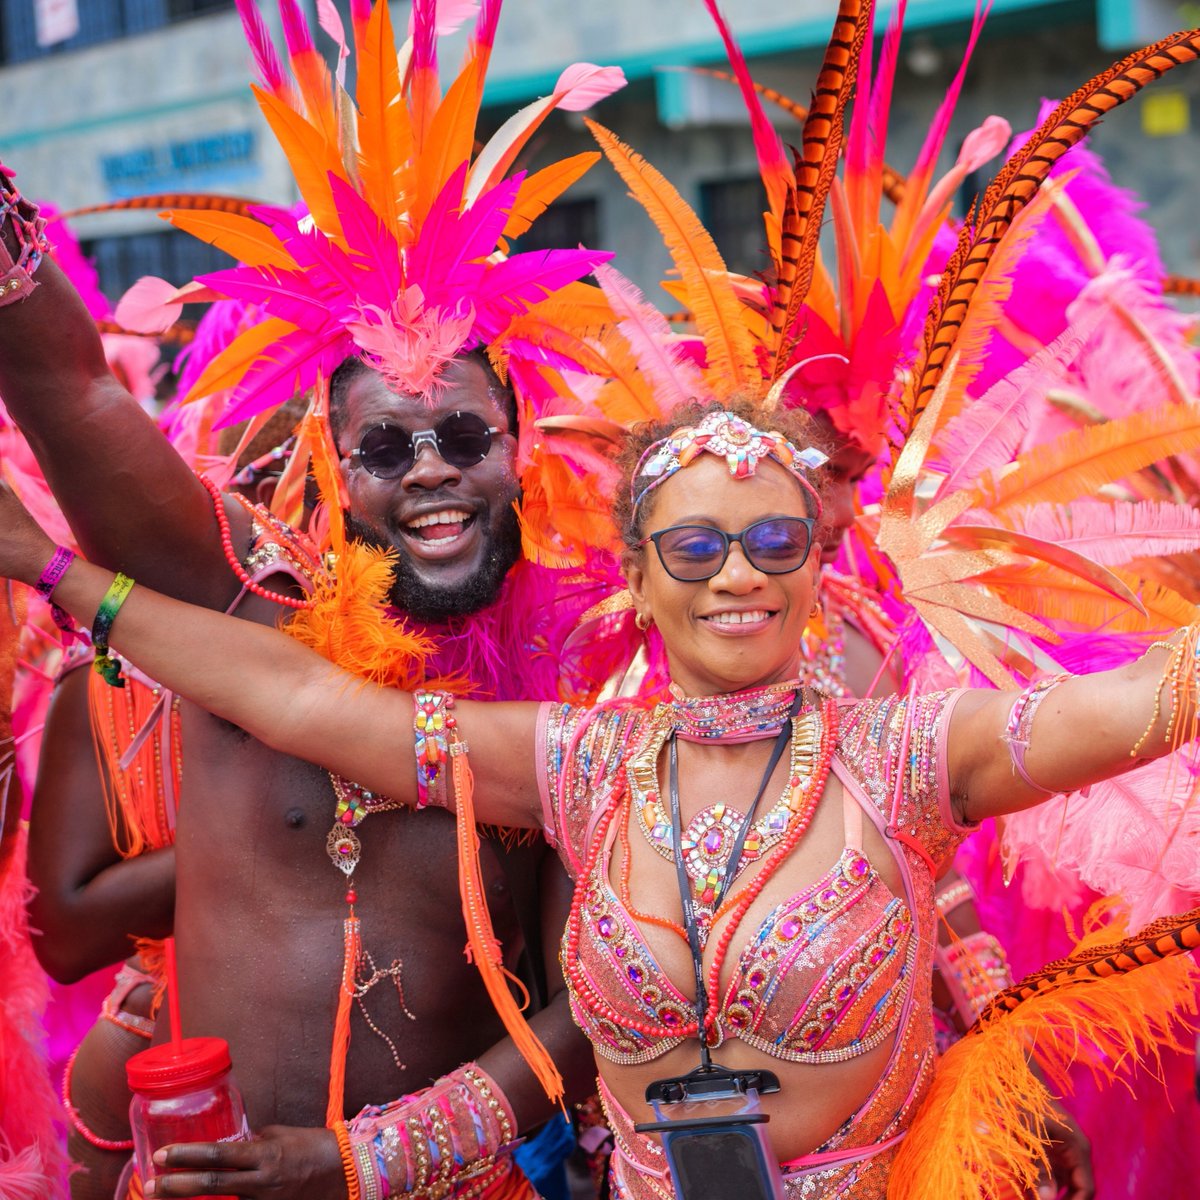 Get excited, we're less than ONE MONTH AWAY! ⏳⁠
⁠
#j4f #just4funcarnival #stluciacarnival #saintluciacarnival #carnival2023 #stlucia ⁠#saintluciacarnival2023 #letherinspireyou⁠